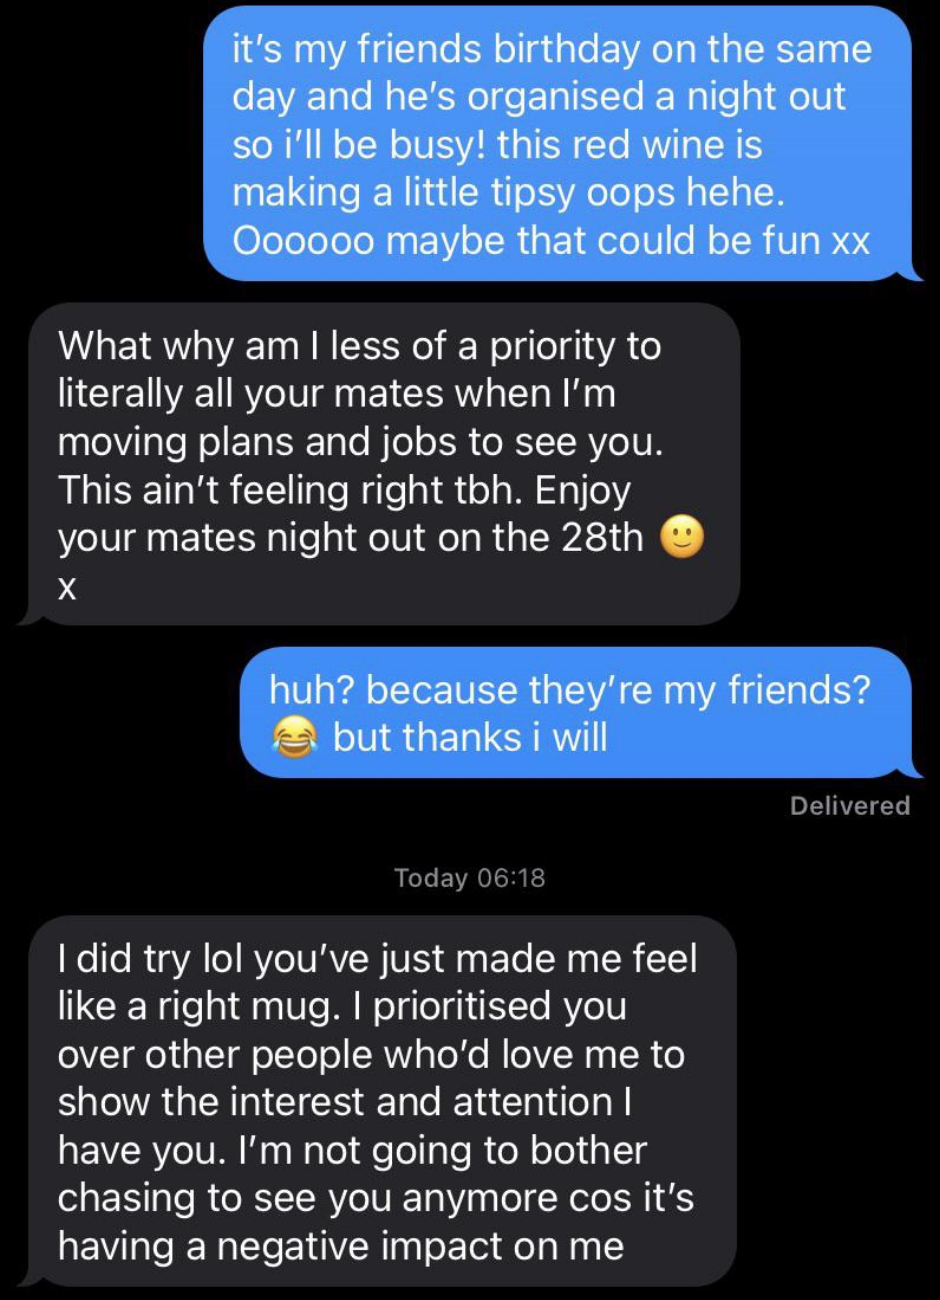 The woman says she can't go on a date because she has plans with friends, and the man responds with a guilt trip about how she's not making him a priority